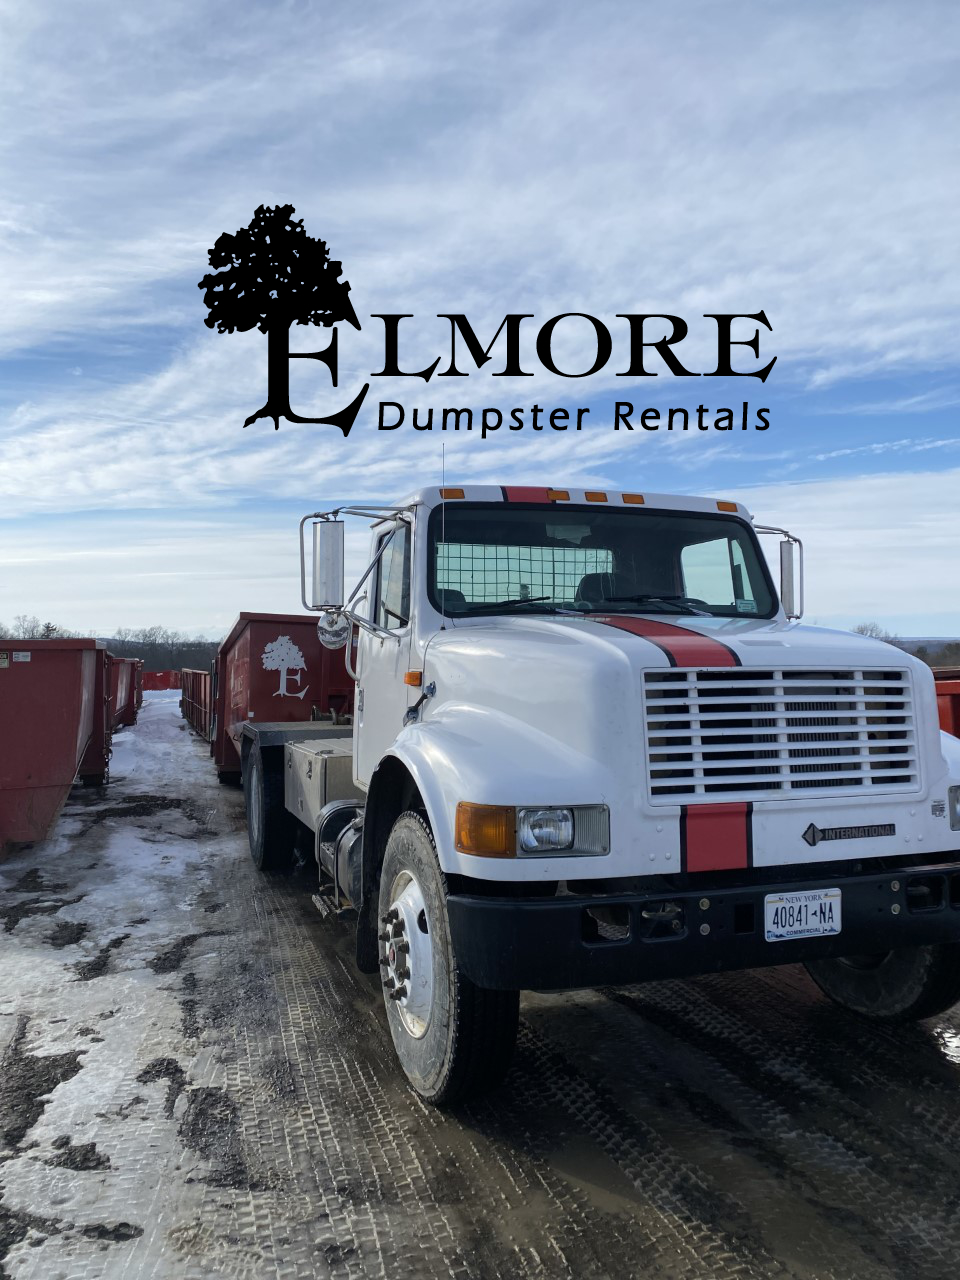 Reliable Dumpster Rental Elmore Dumpster Rentals Ithaca NY 